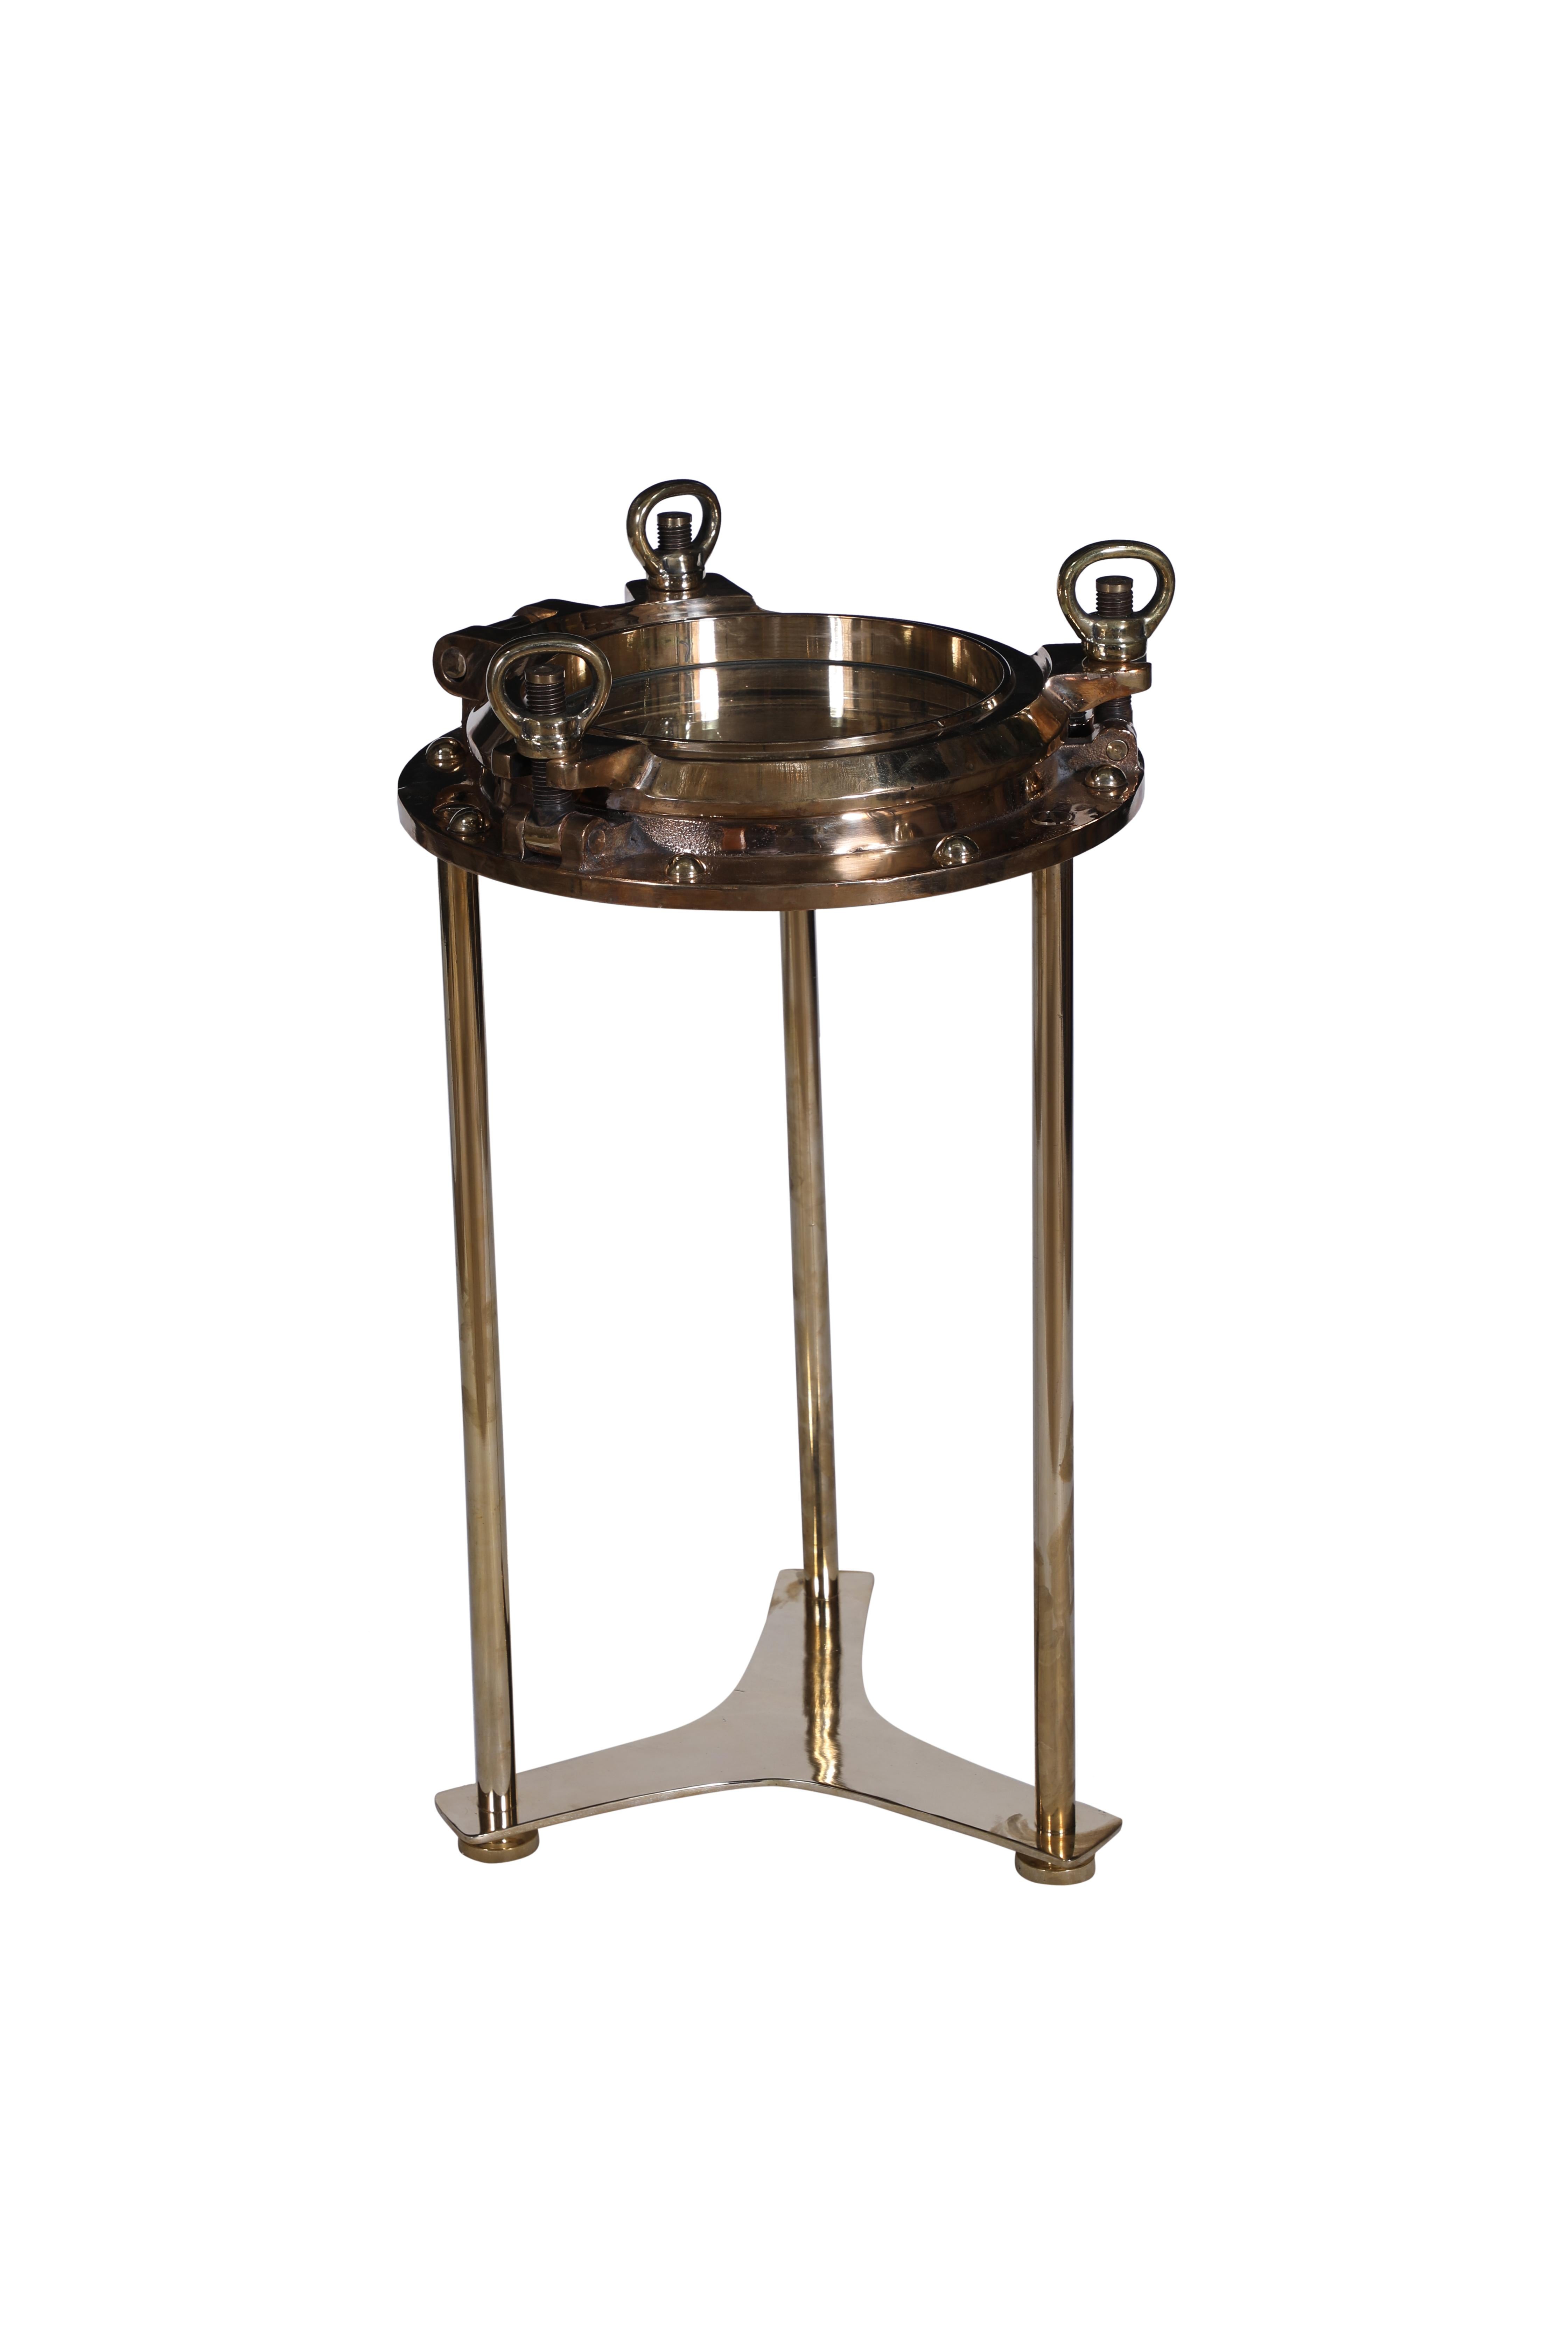 A bronze ship's porthole converted to a side table by Deborah Lockhart Phillips. It has been designed to come apart leaving the porthole free of the legs and base. The rivets have been put back in as these come out when taken off the ships. The